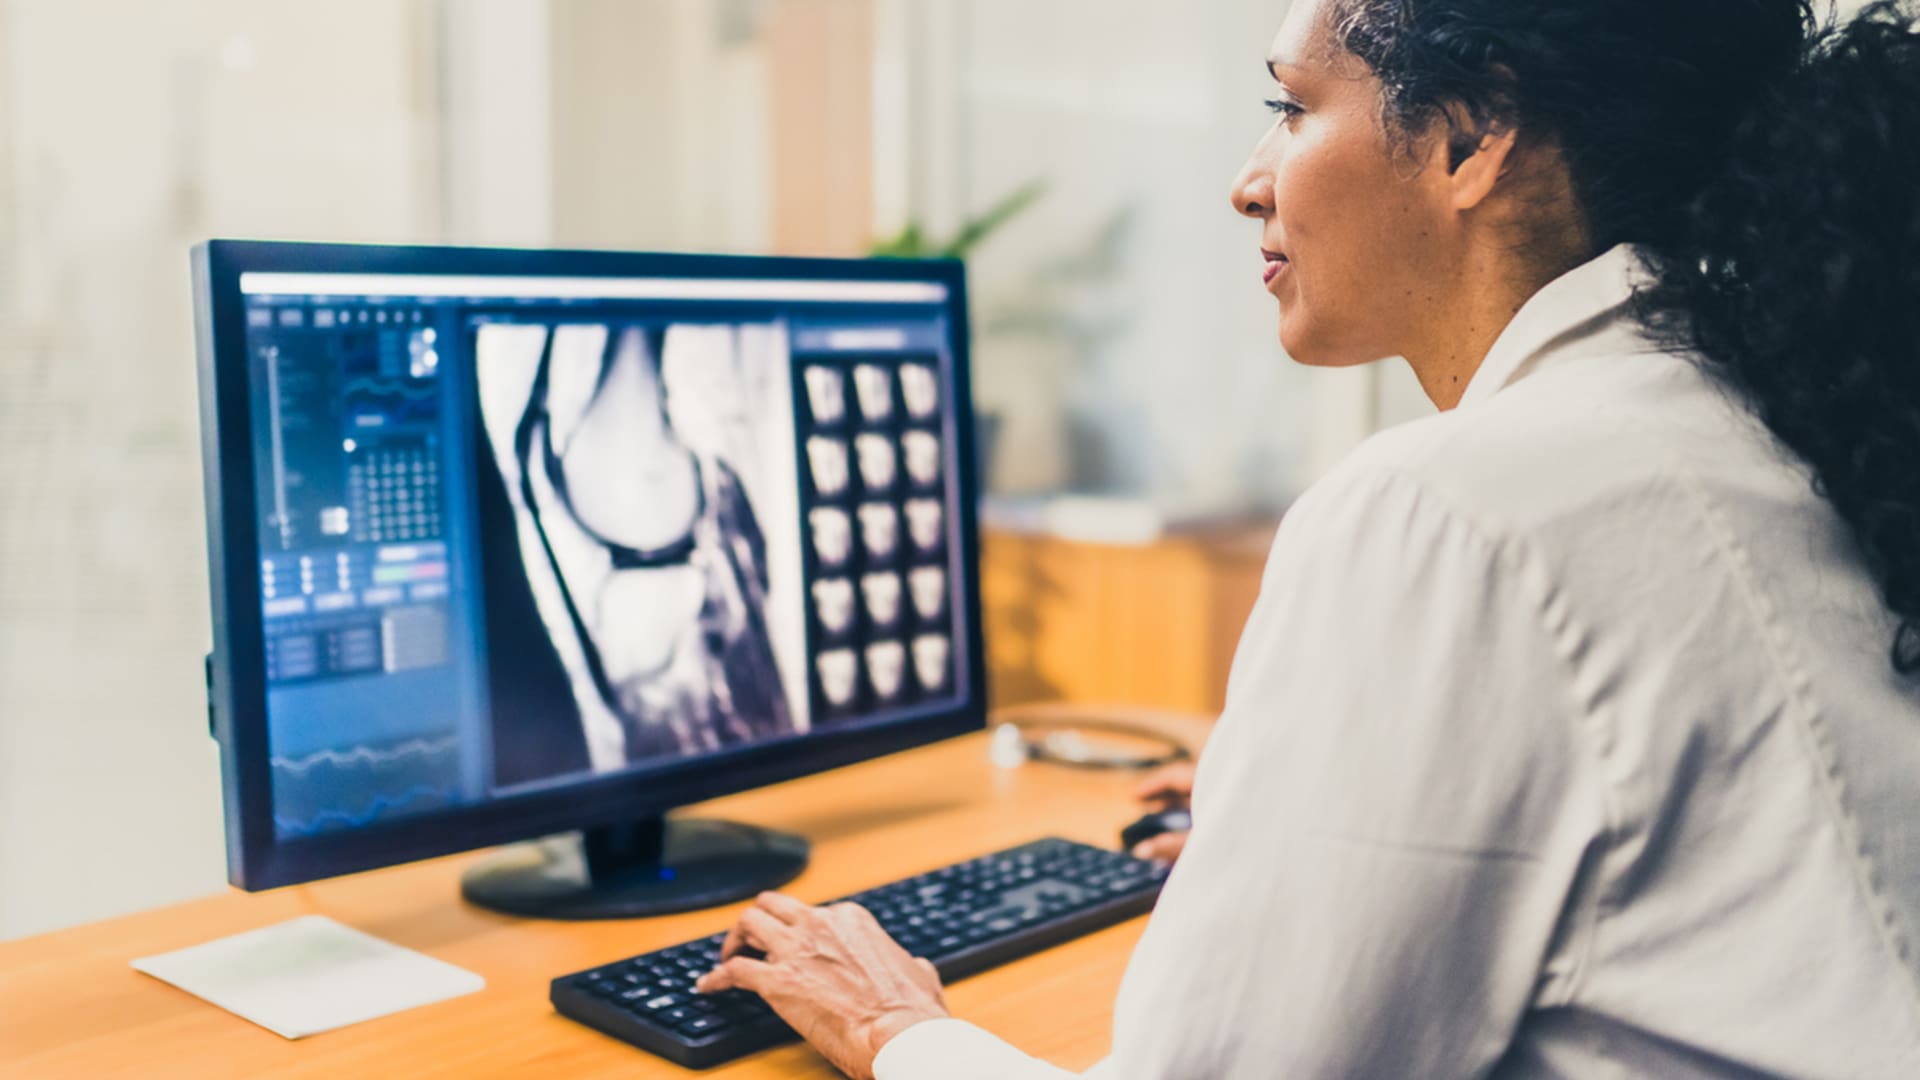 Real-time radiology reporting benefits primary care